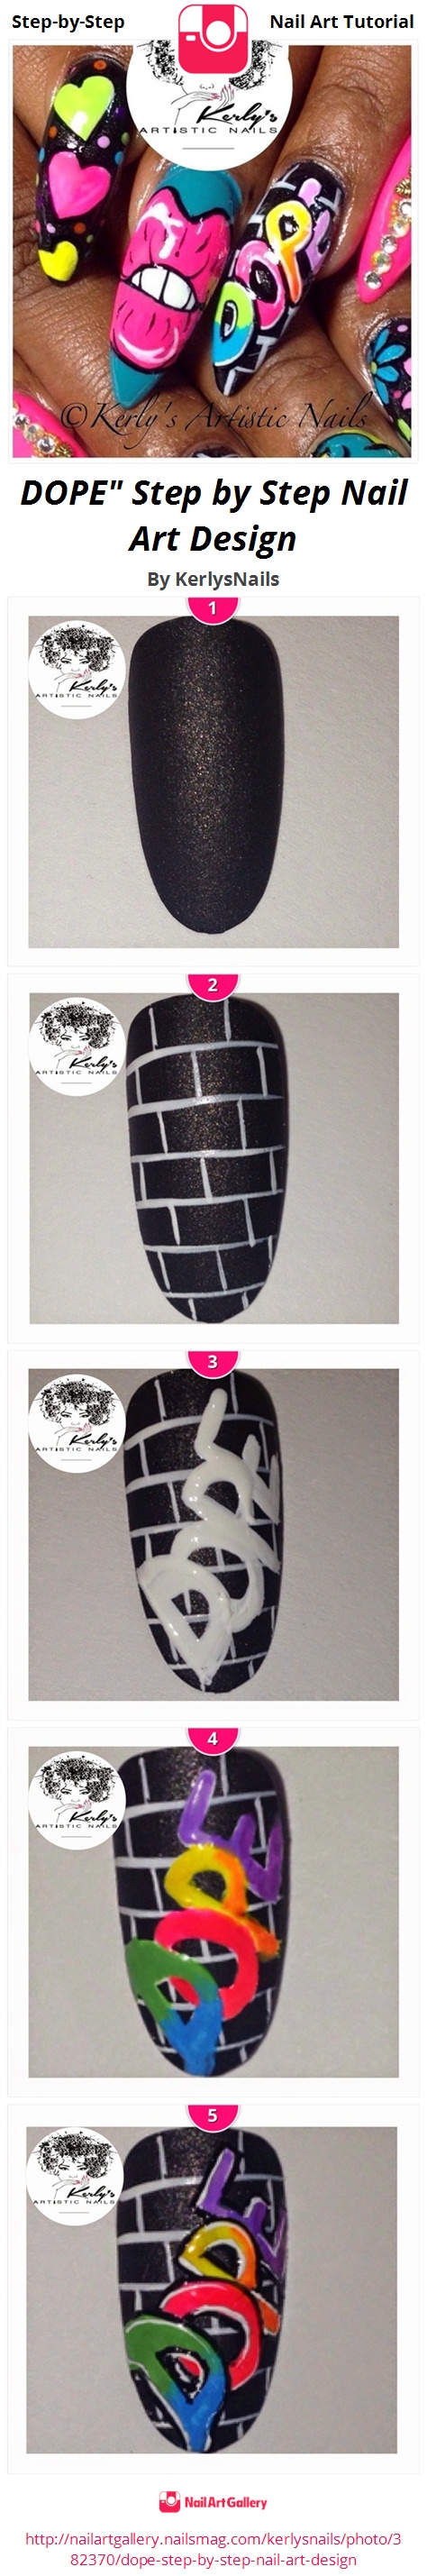 DOPE" Step by Step Nail Art Design - Nail Art Gallery